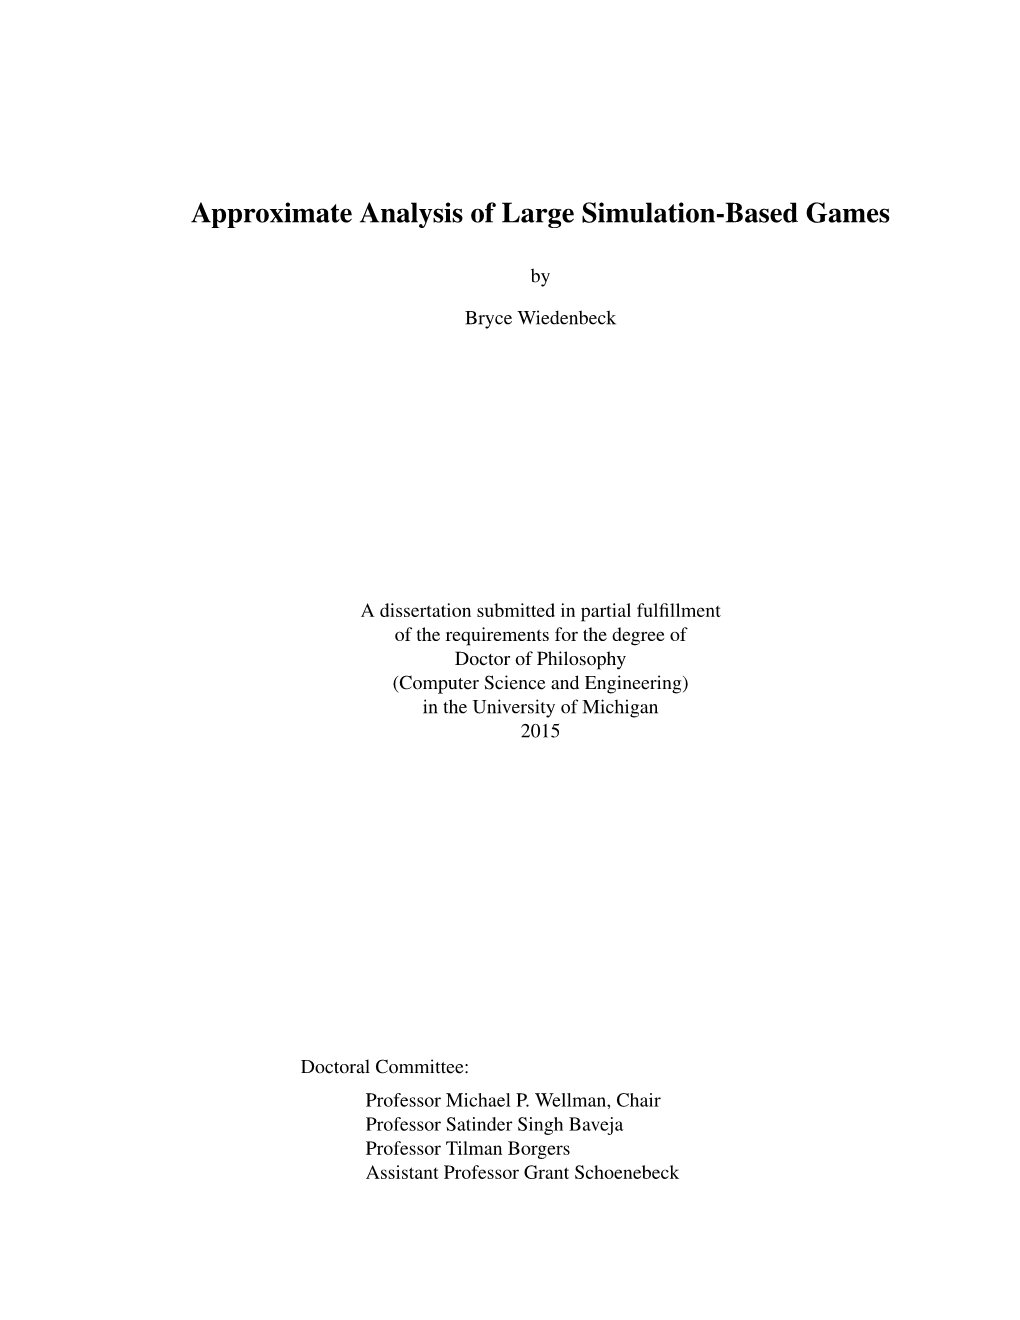 Approximate Analysis of Large Simulation-Based Games